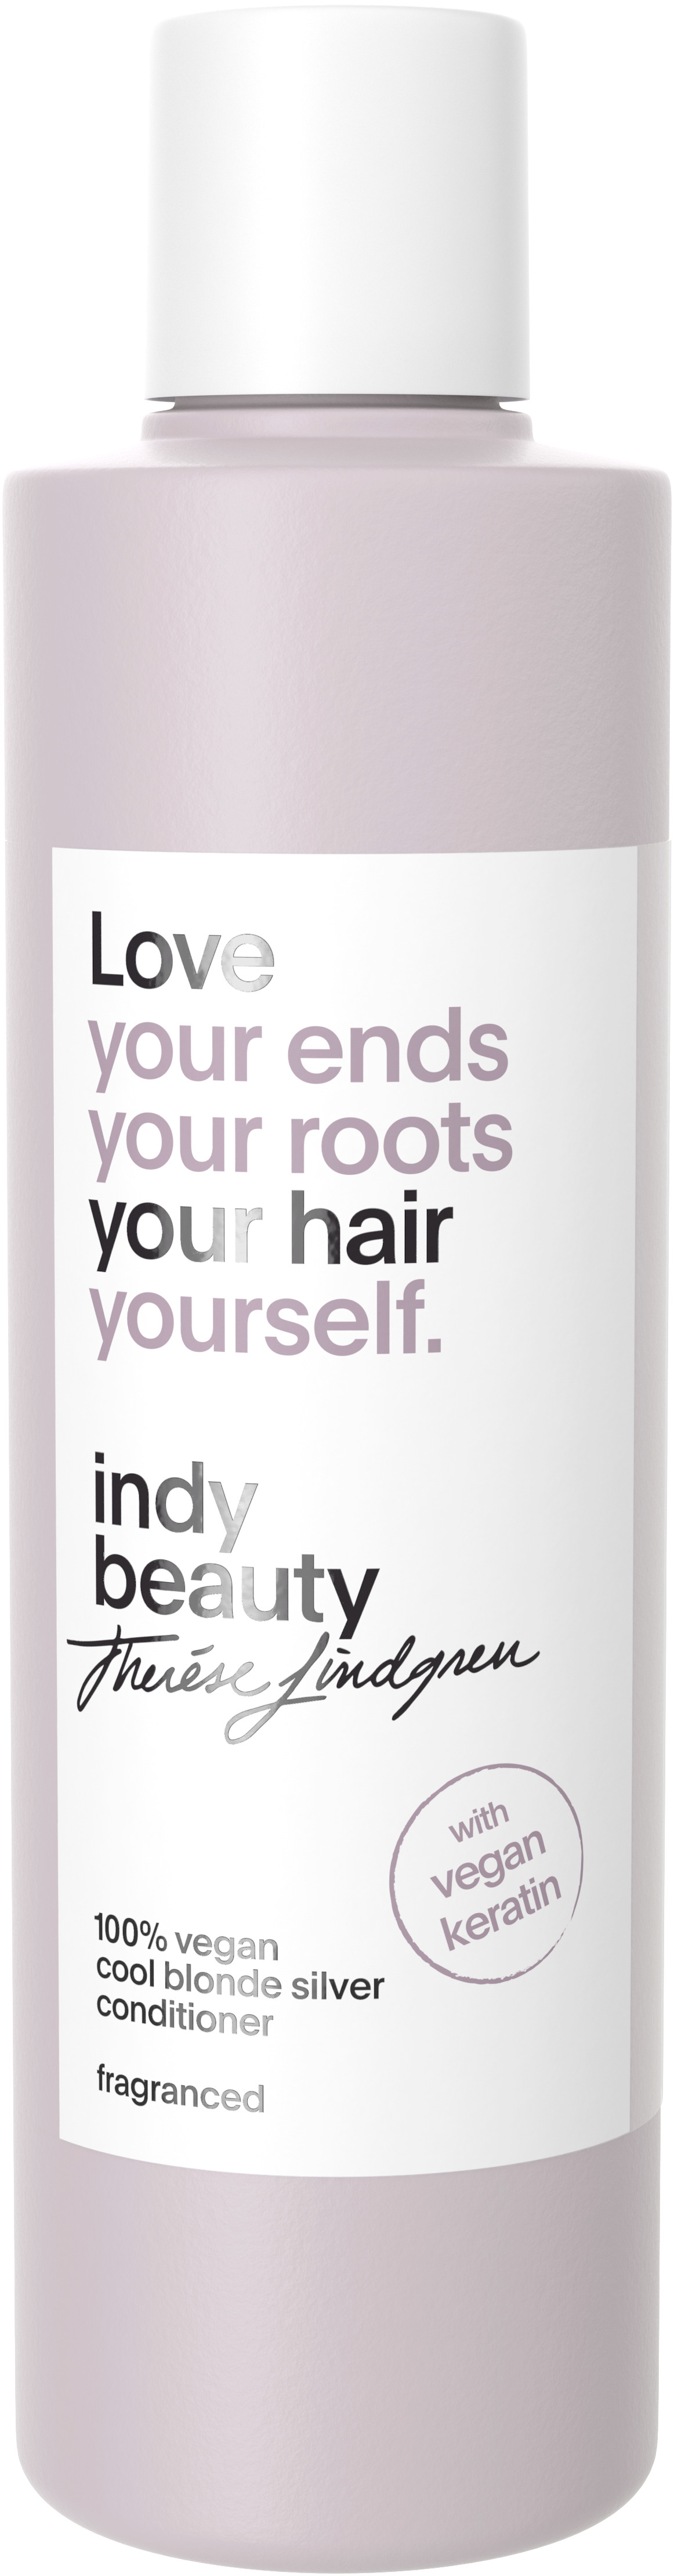 Indy Beauty Silverbalsam 250ml